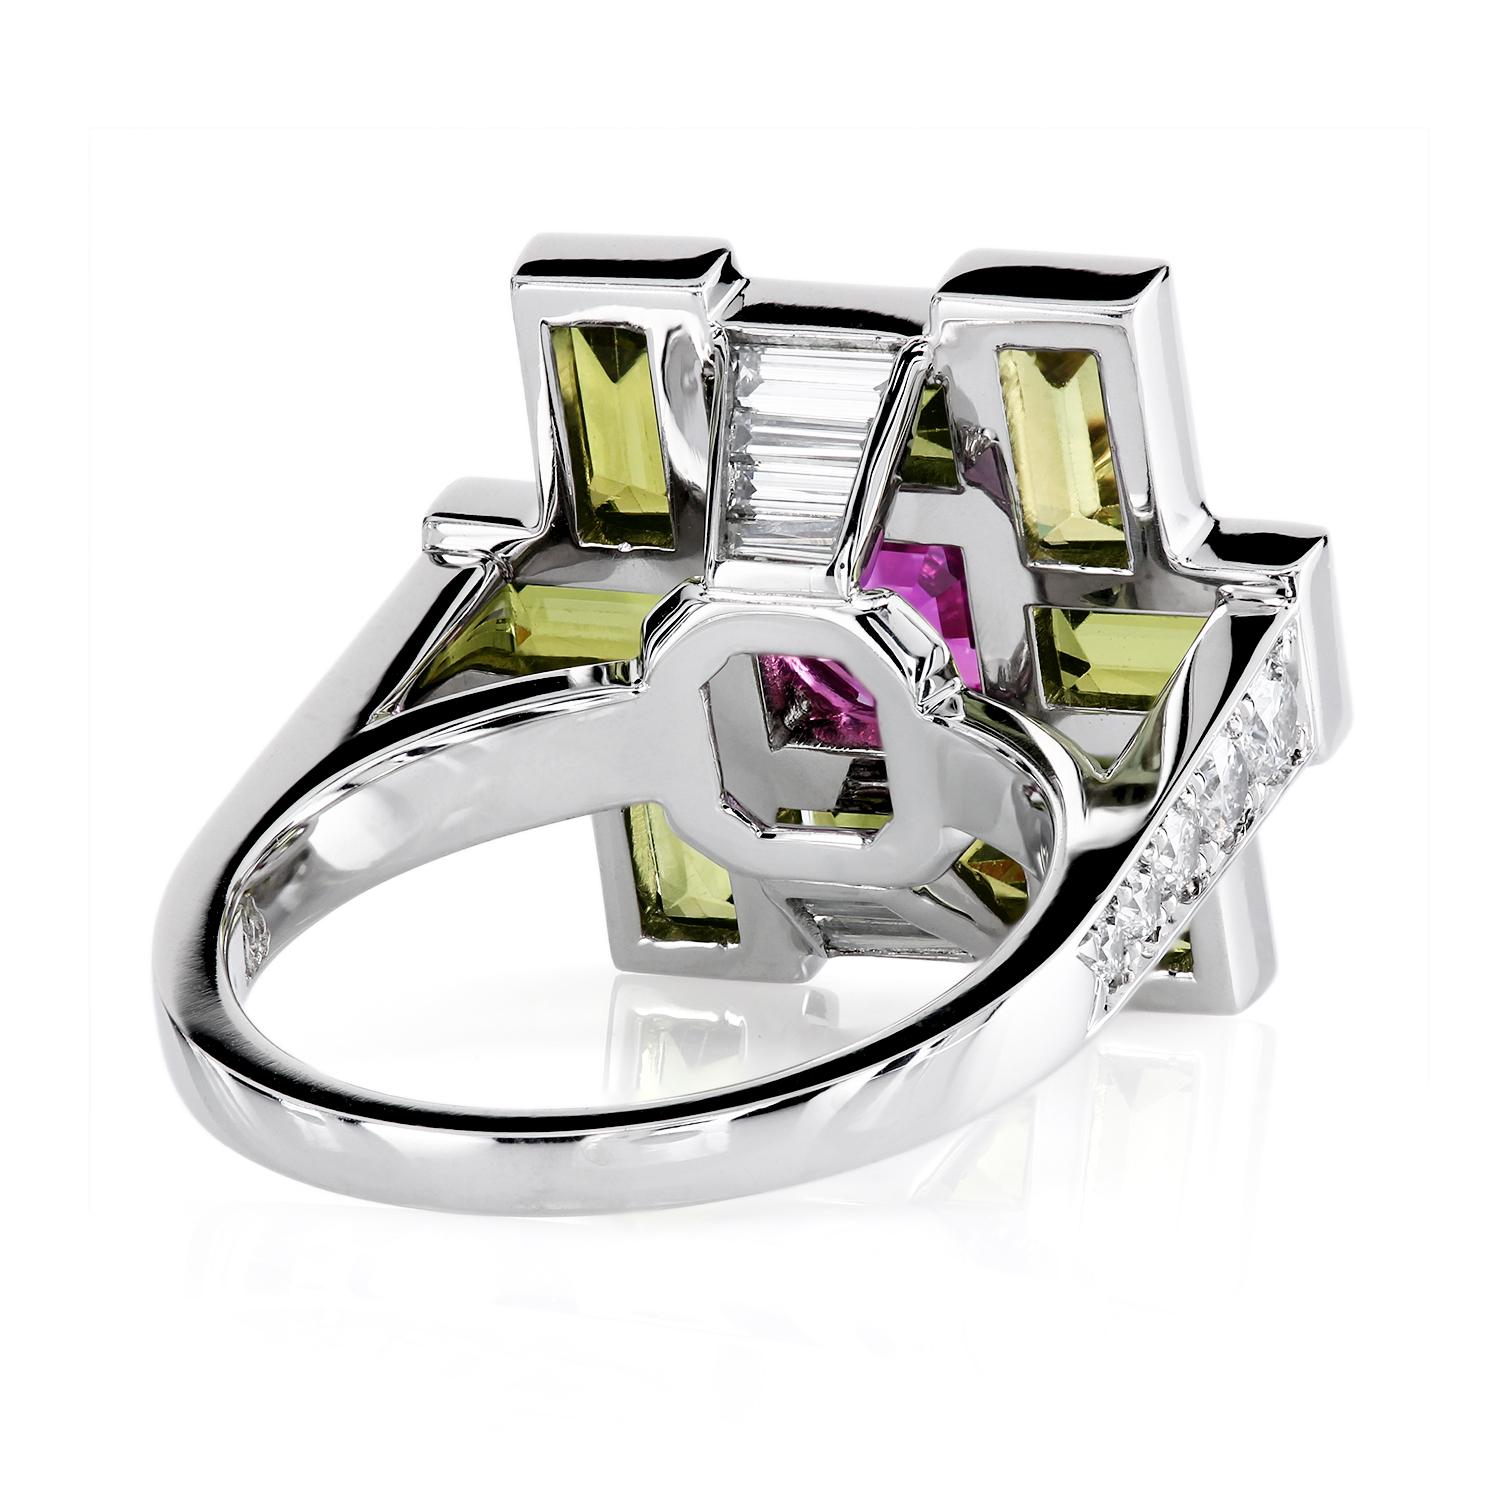 Asscher Cut Leon Mege Natural Pink and Olive Sapphires Diamond Platinum Ring For Sale